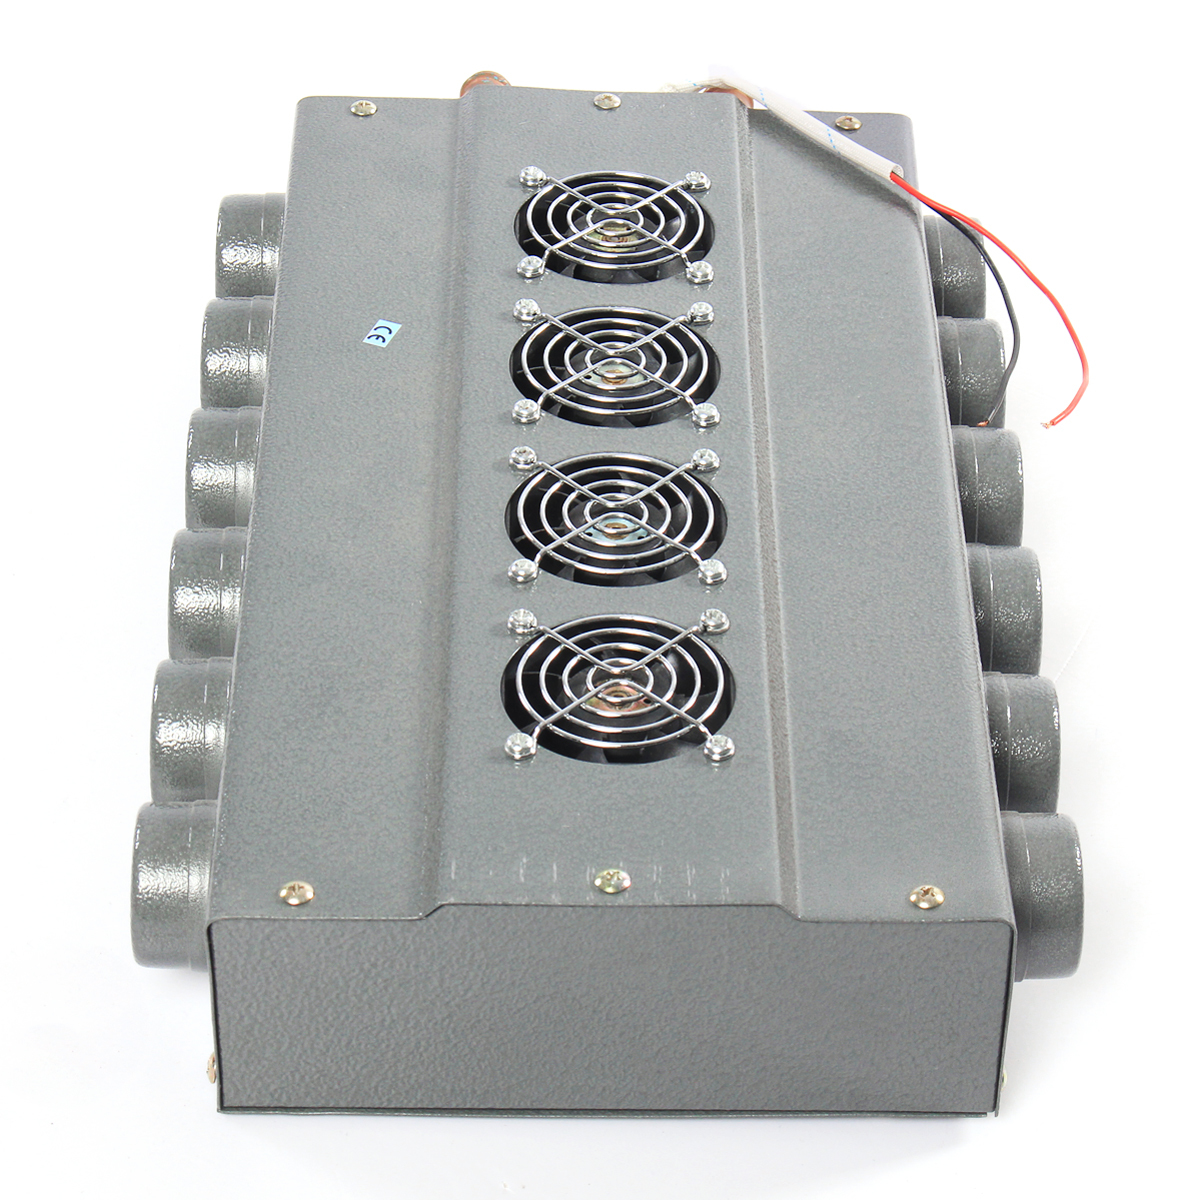 DC 12V 24V 12 Holes 4 Fan Universal Heater Defroster Double Side Compact For Car Truck 2